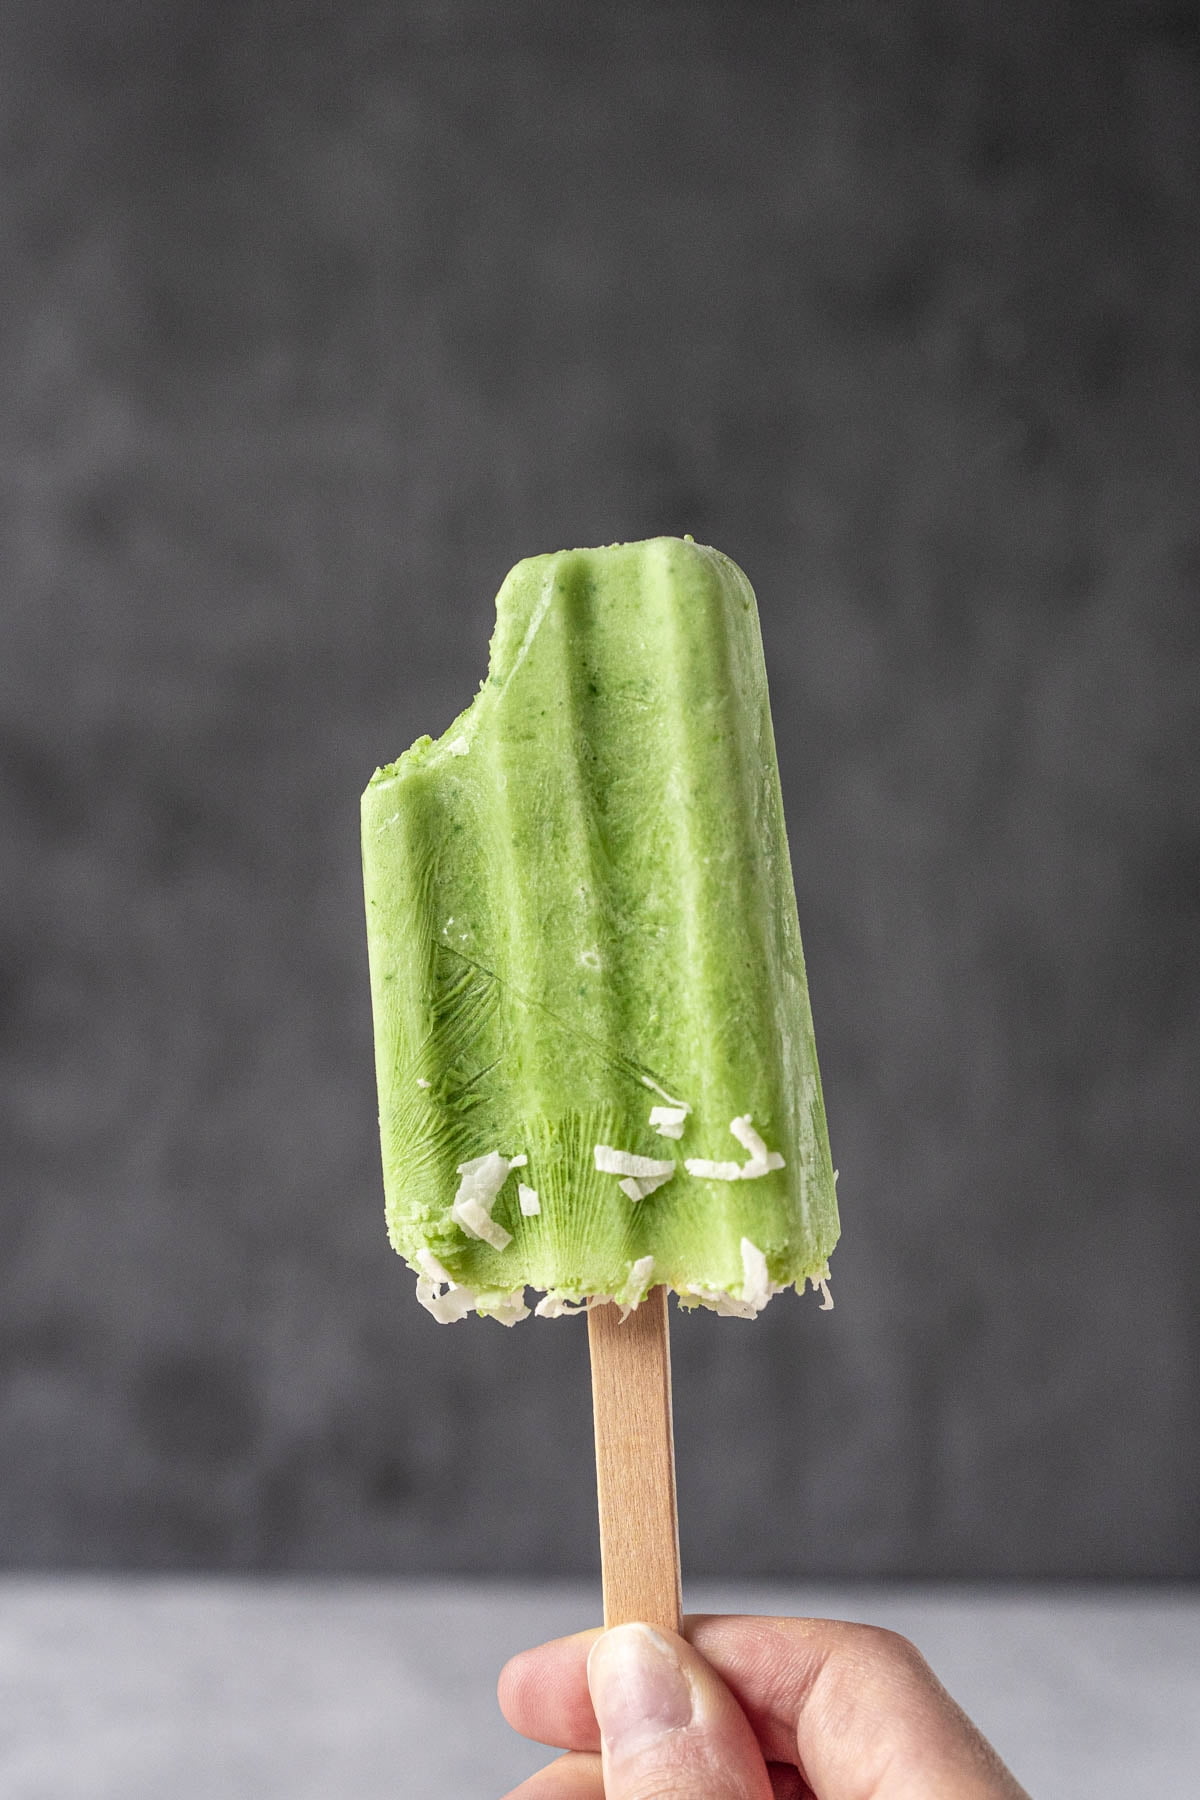 green popsicles with shredded coconut pieces